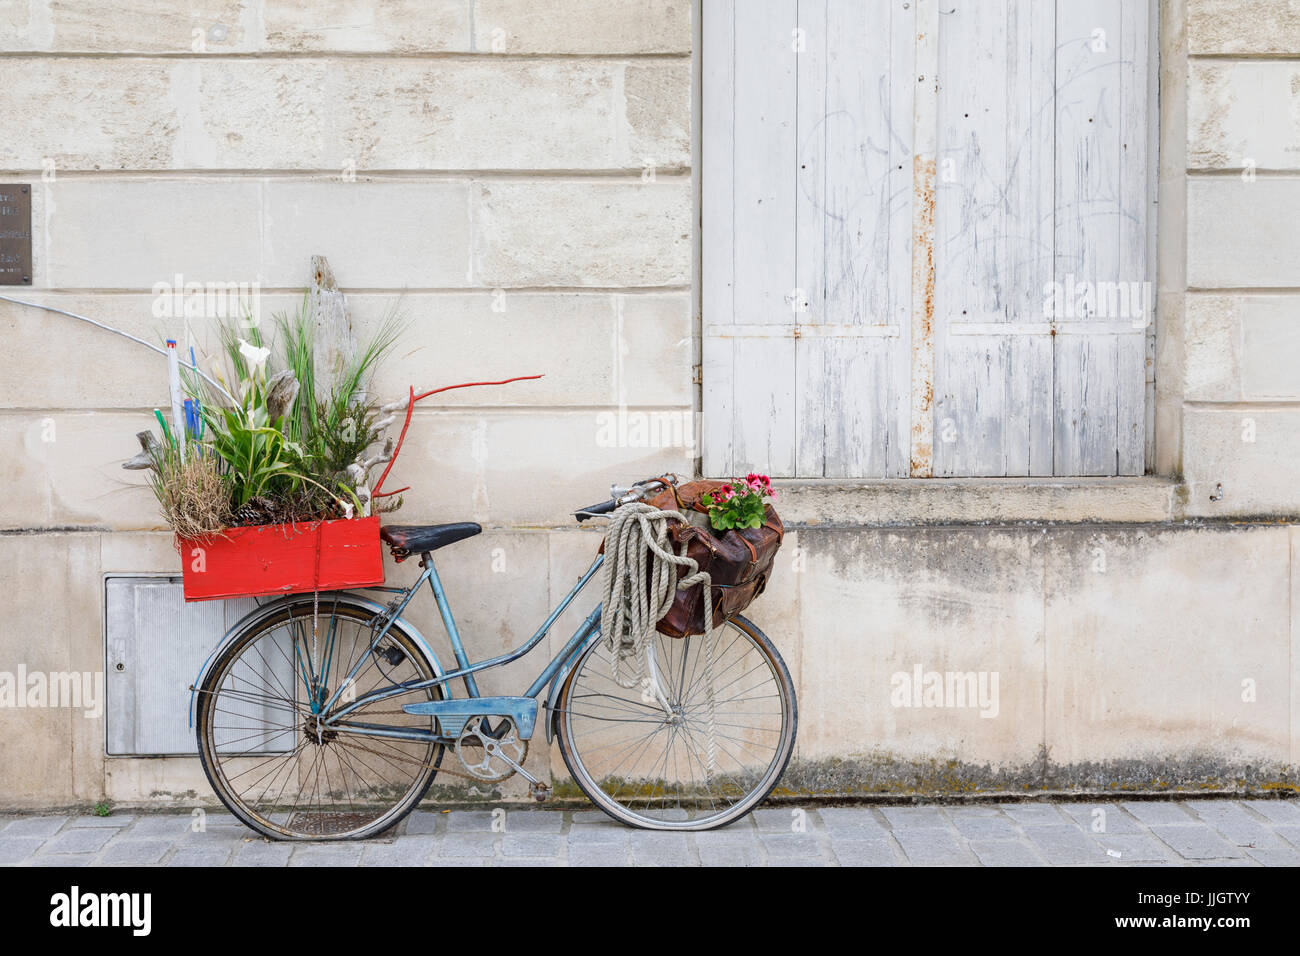 Old fashioned blue lady's bicycle with flat tyres parked leaning against a wall, Pauillac, Gironde department, Nouvelle-Aquitaine, southwestern France Stock Photo